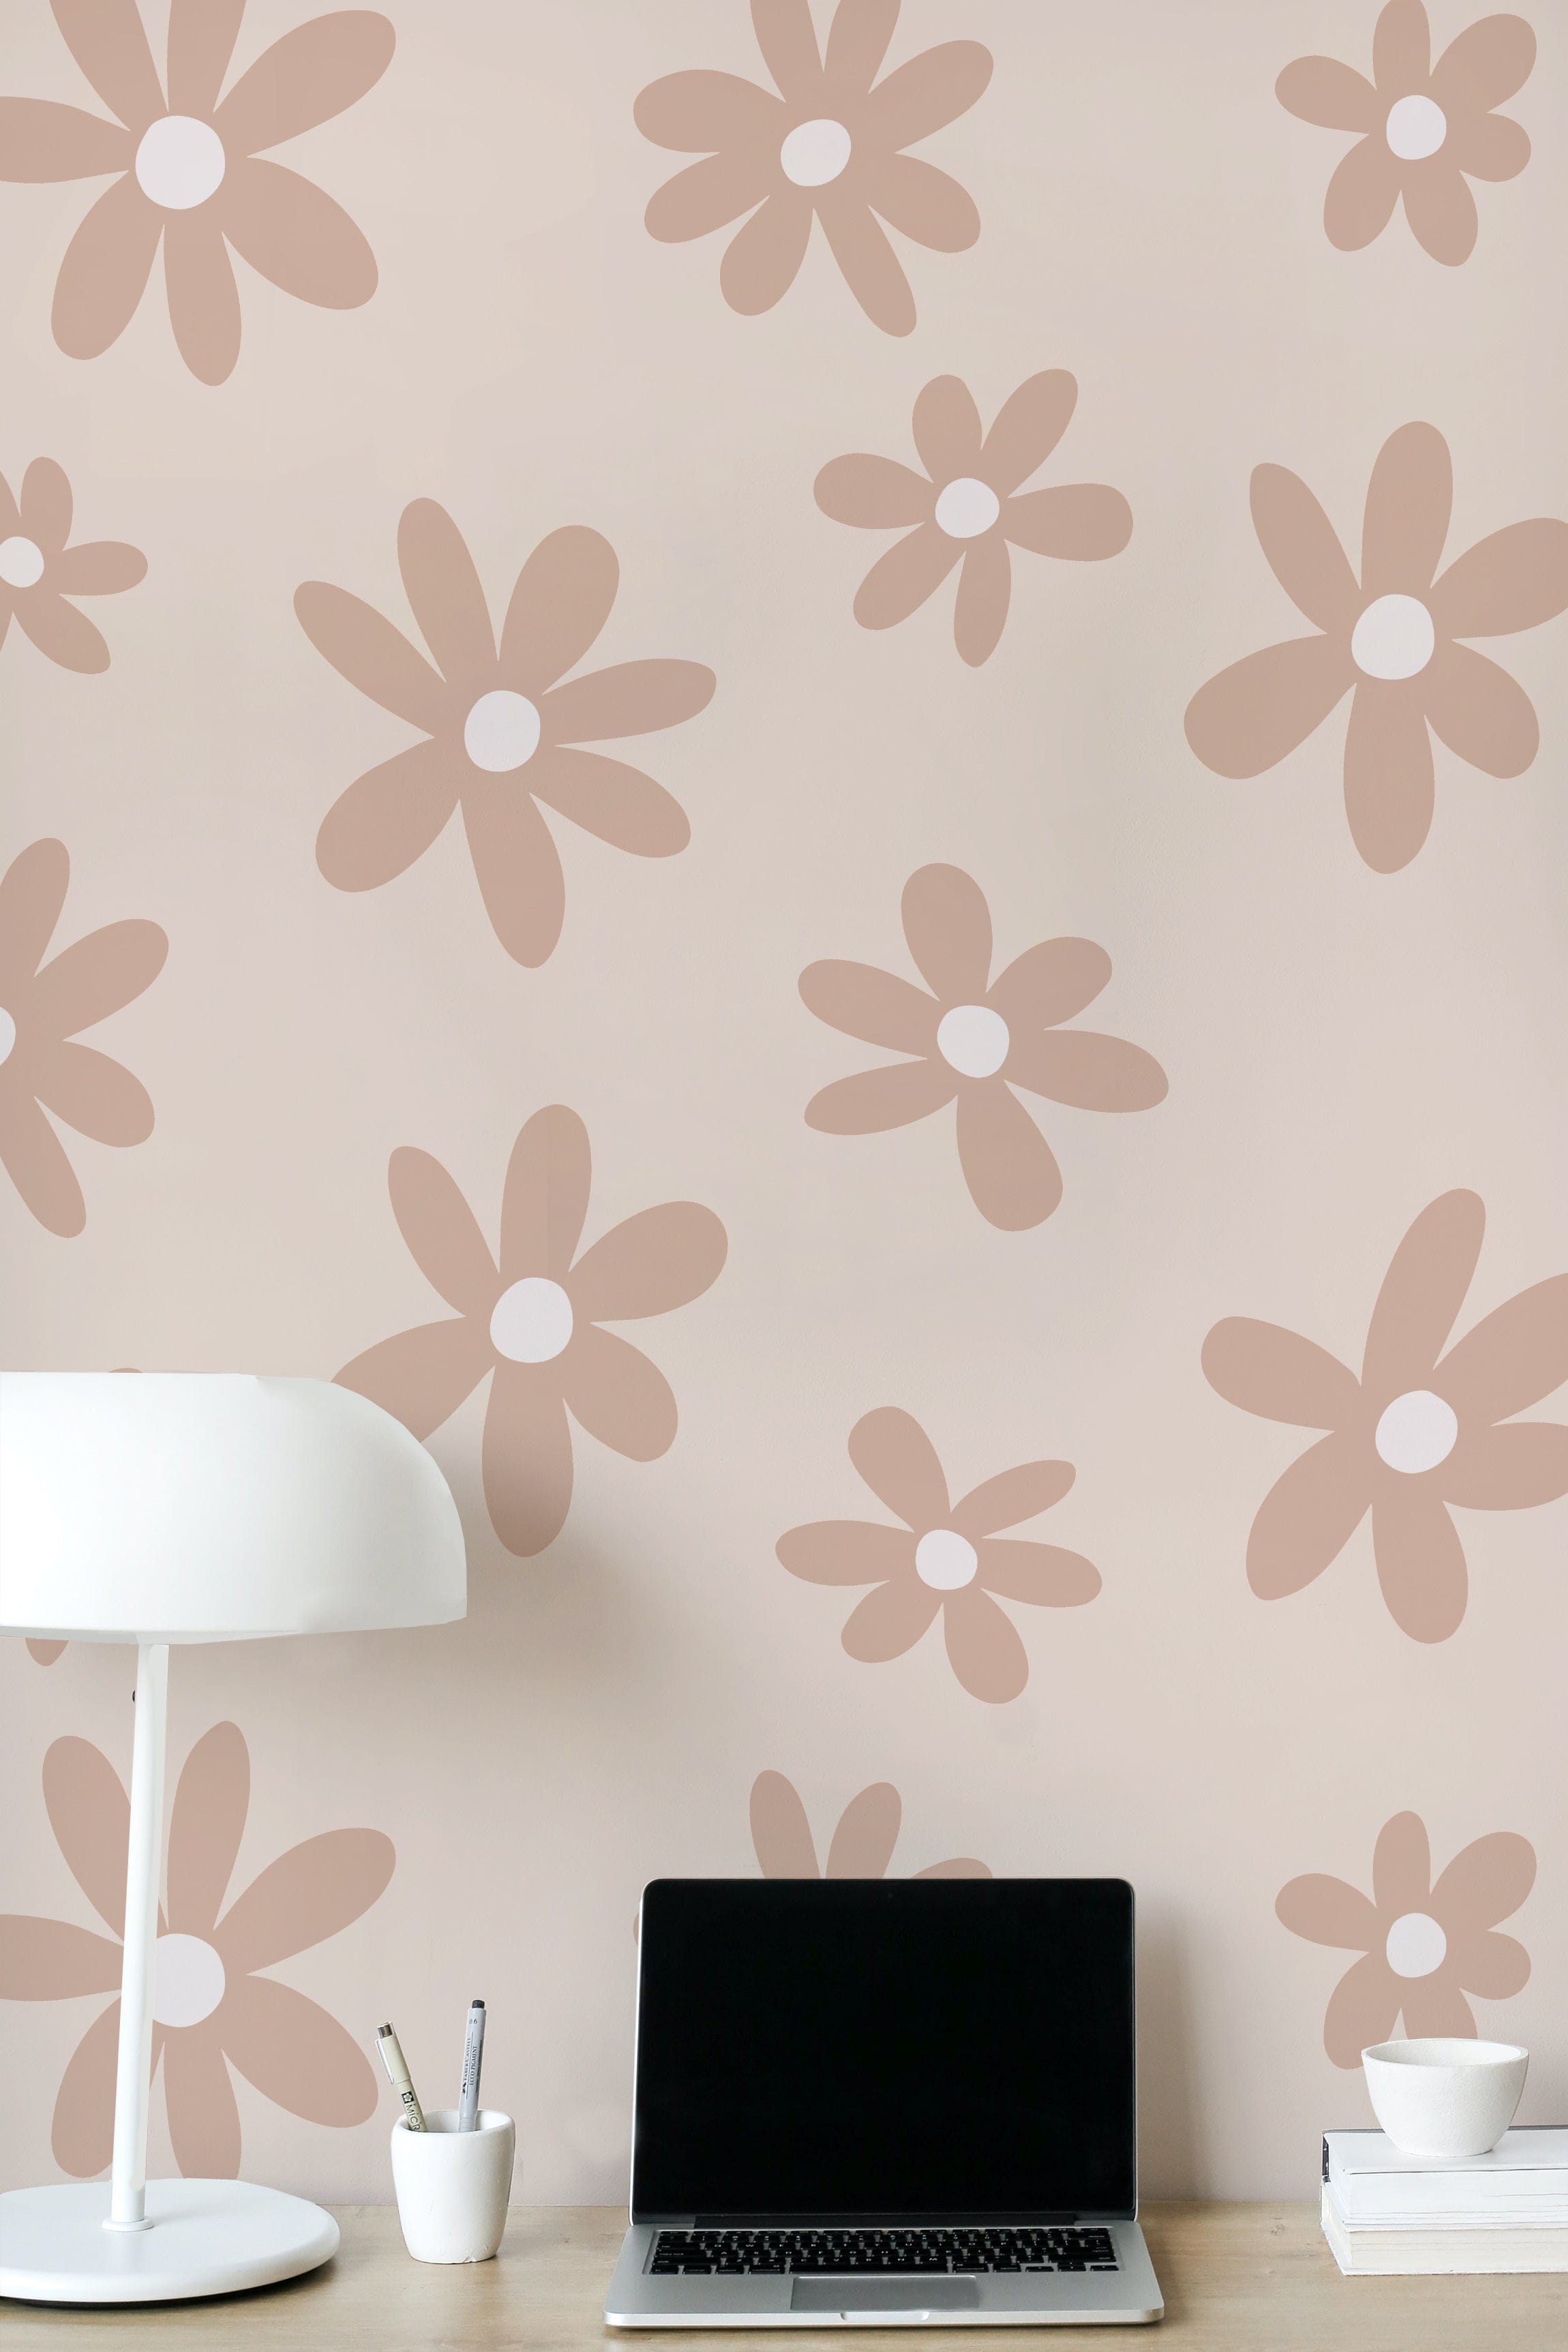 A modern workspace featuring a laptop on a wooden desk, a white lamp, and Simple Mauve Floral Wallpaper in the background. The large mauve flowers on a light beige background create a calming and stylish backdrop for productivity.